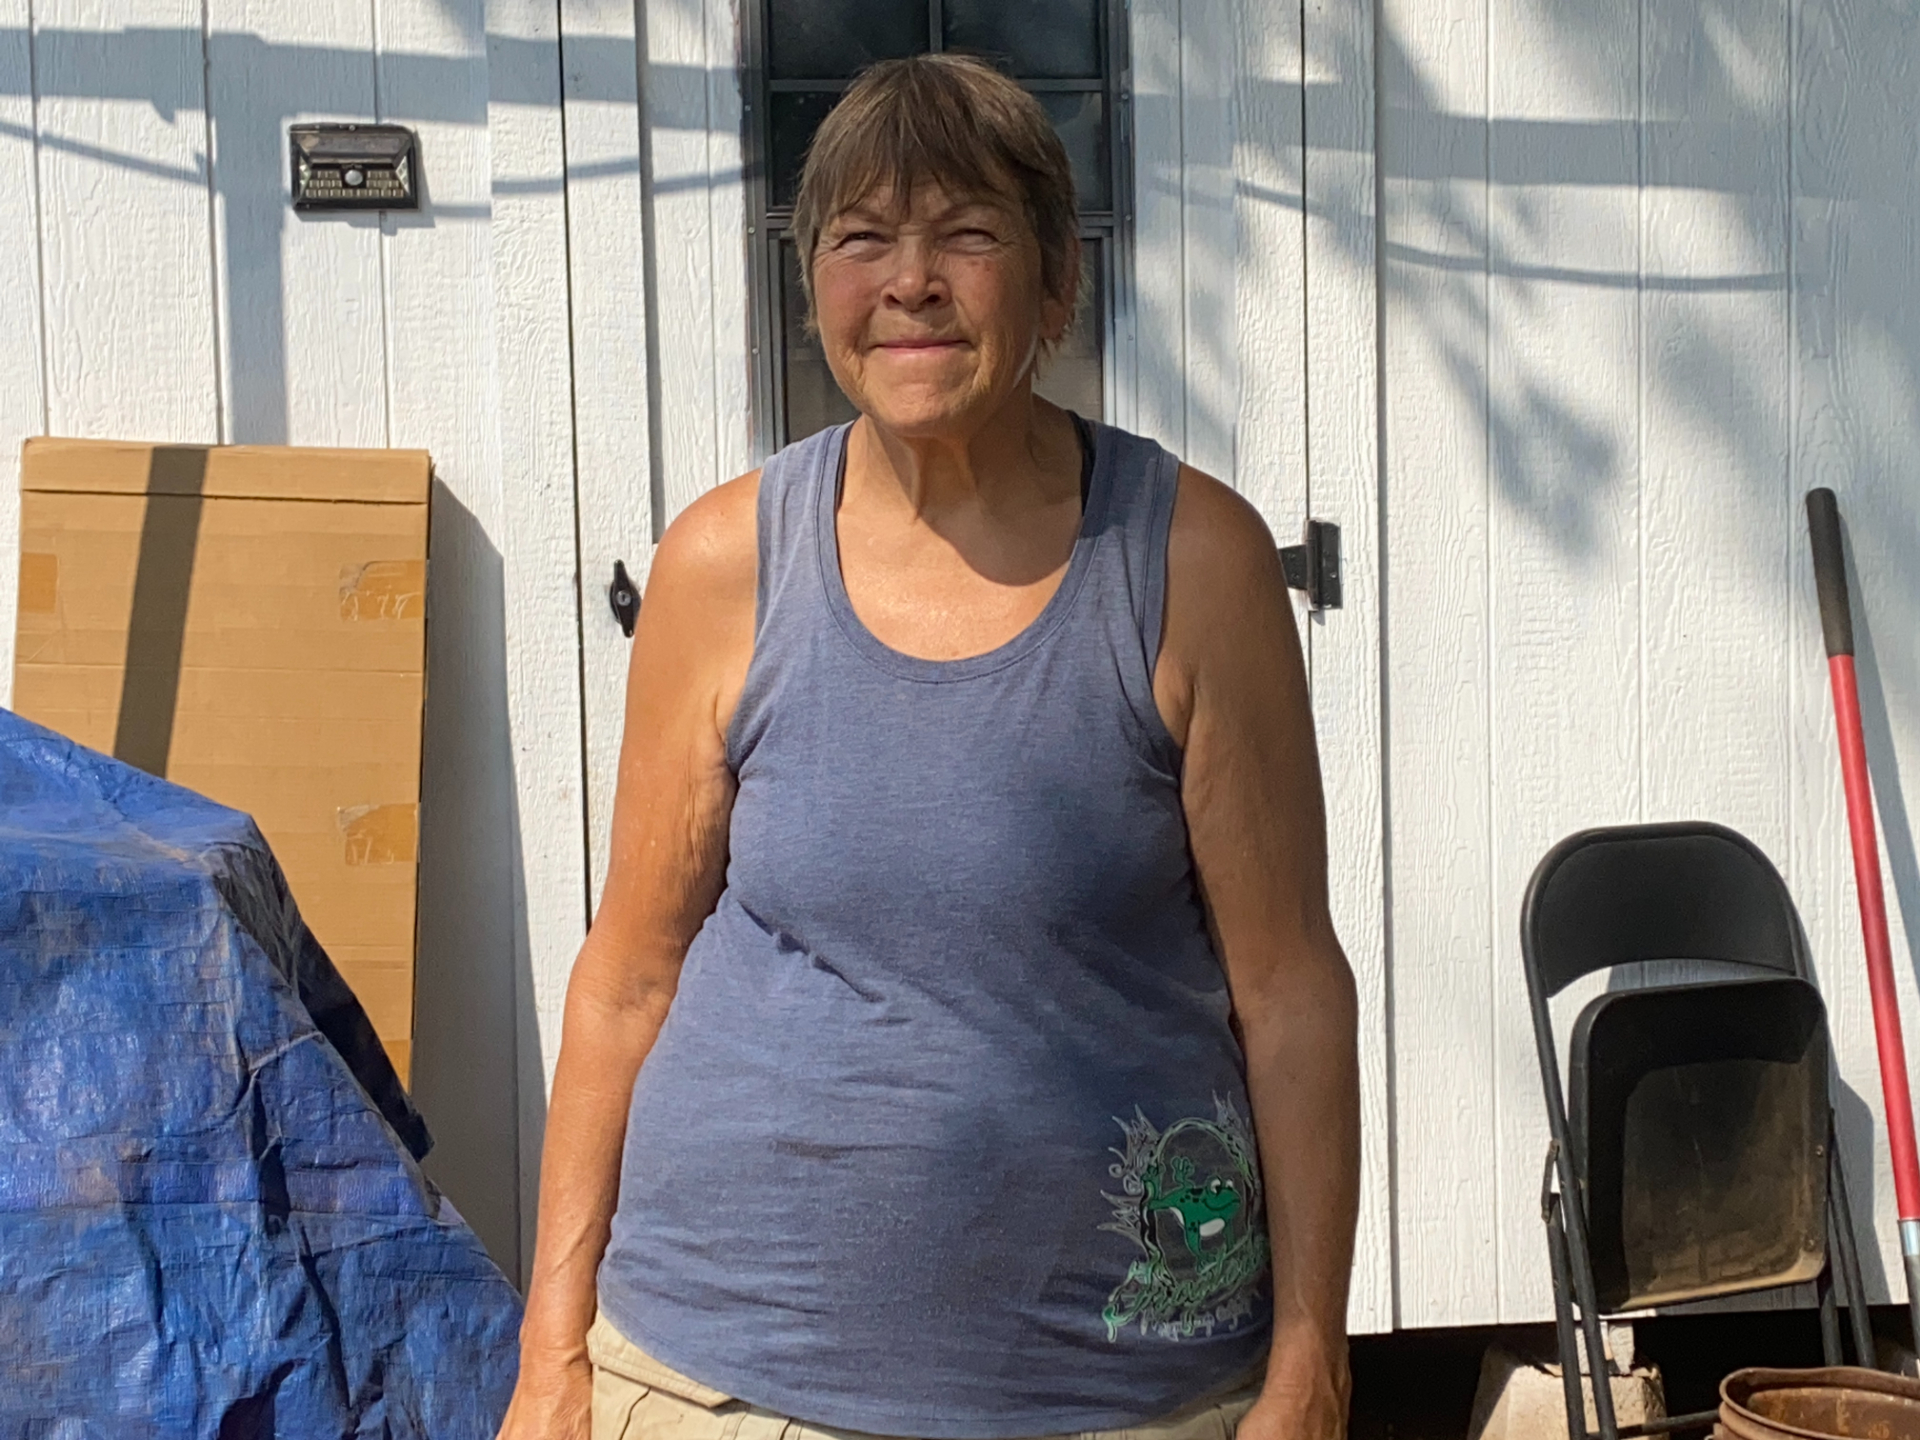 A woman in a tank top stands in front of a storage shed, with a slight smile and eyes closed in the bright sun.